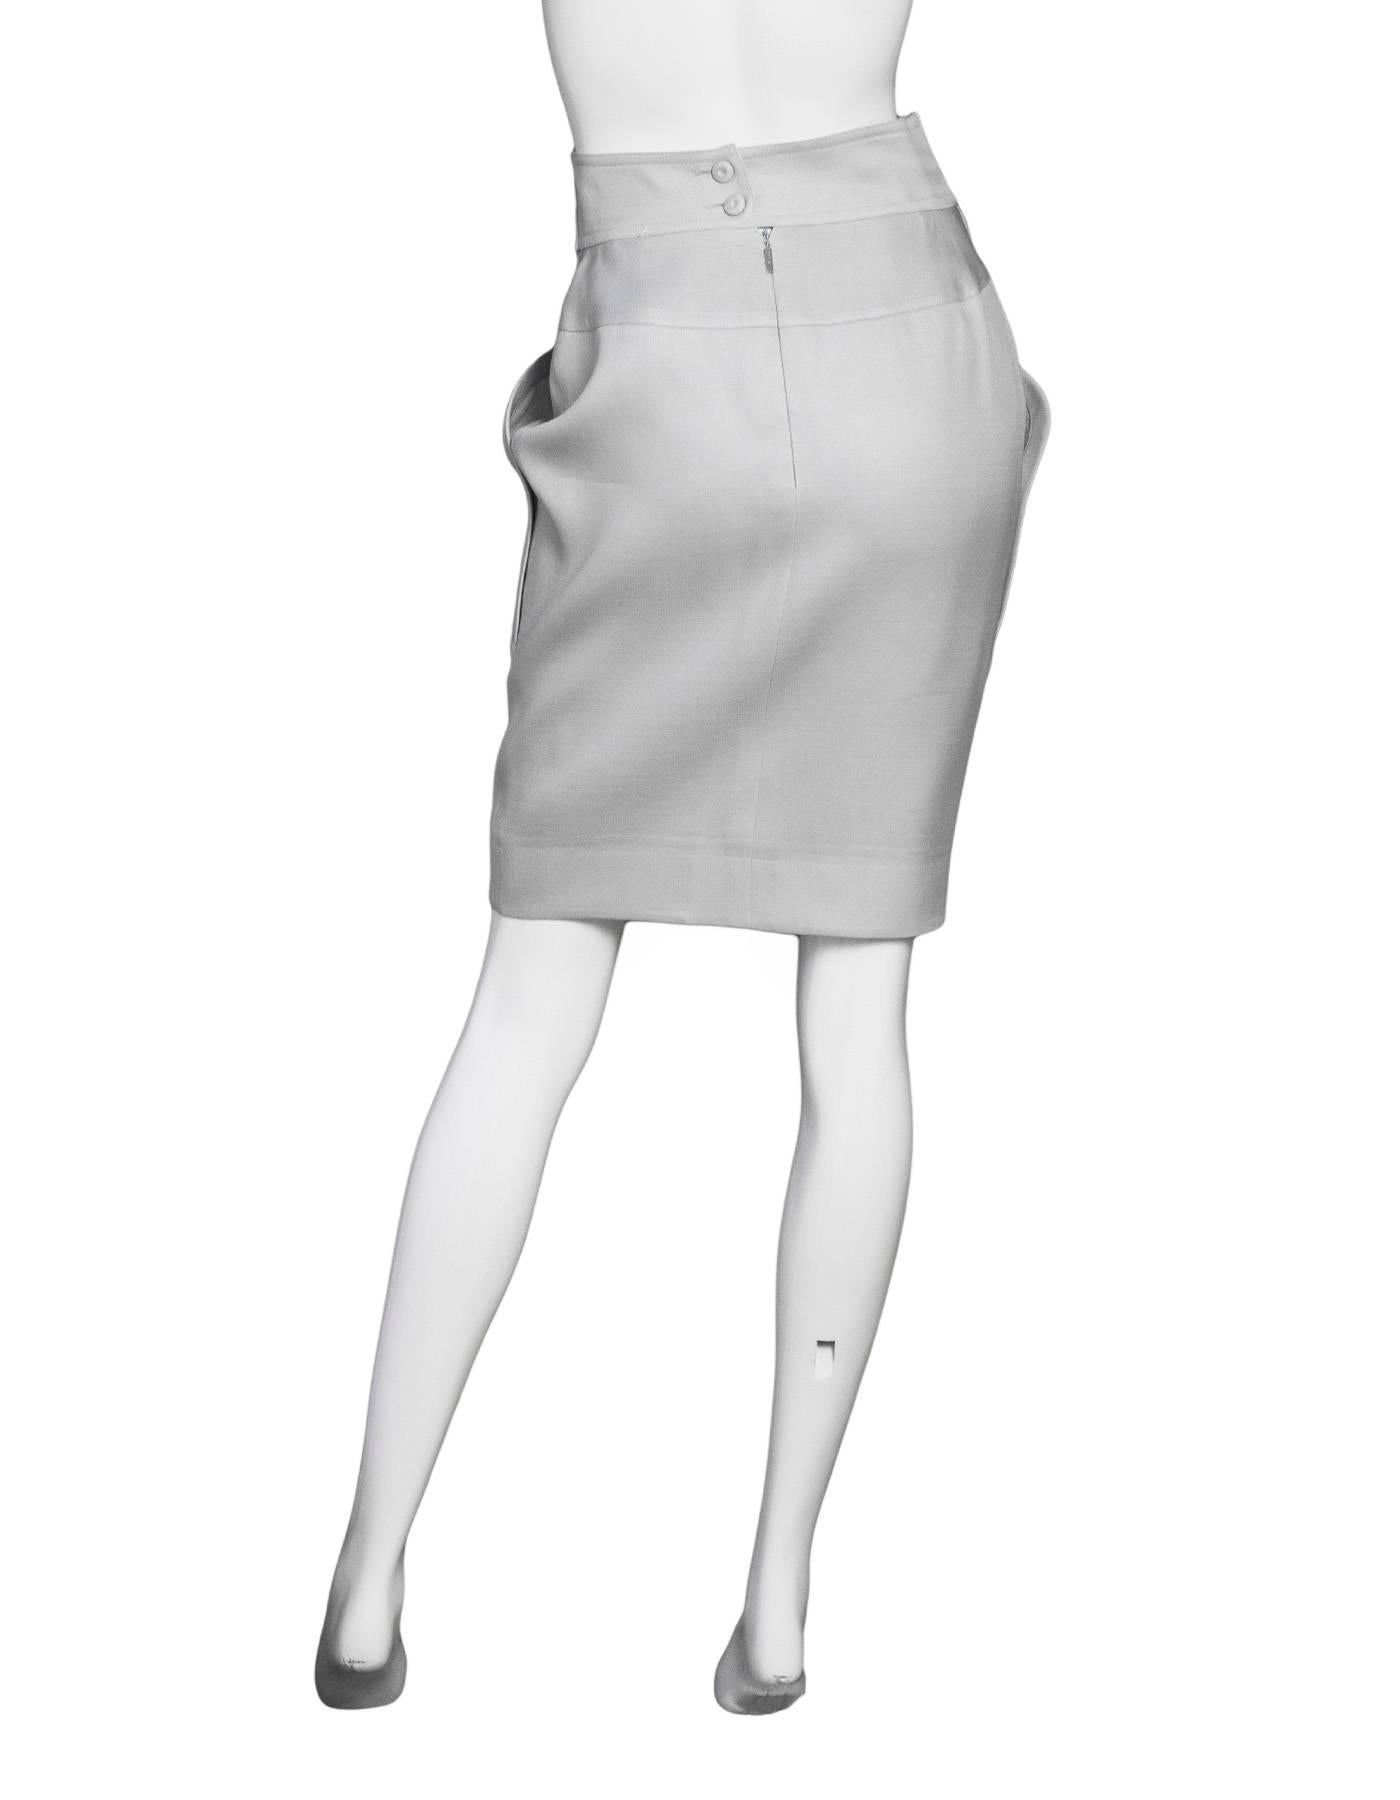 Fendi Grey Silk/Wool Skirt w/ Pockets Sz IT40 In Excellent Condition In New York, NY